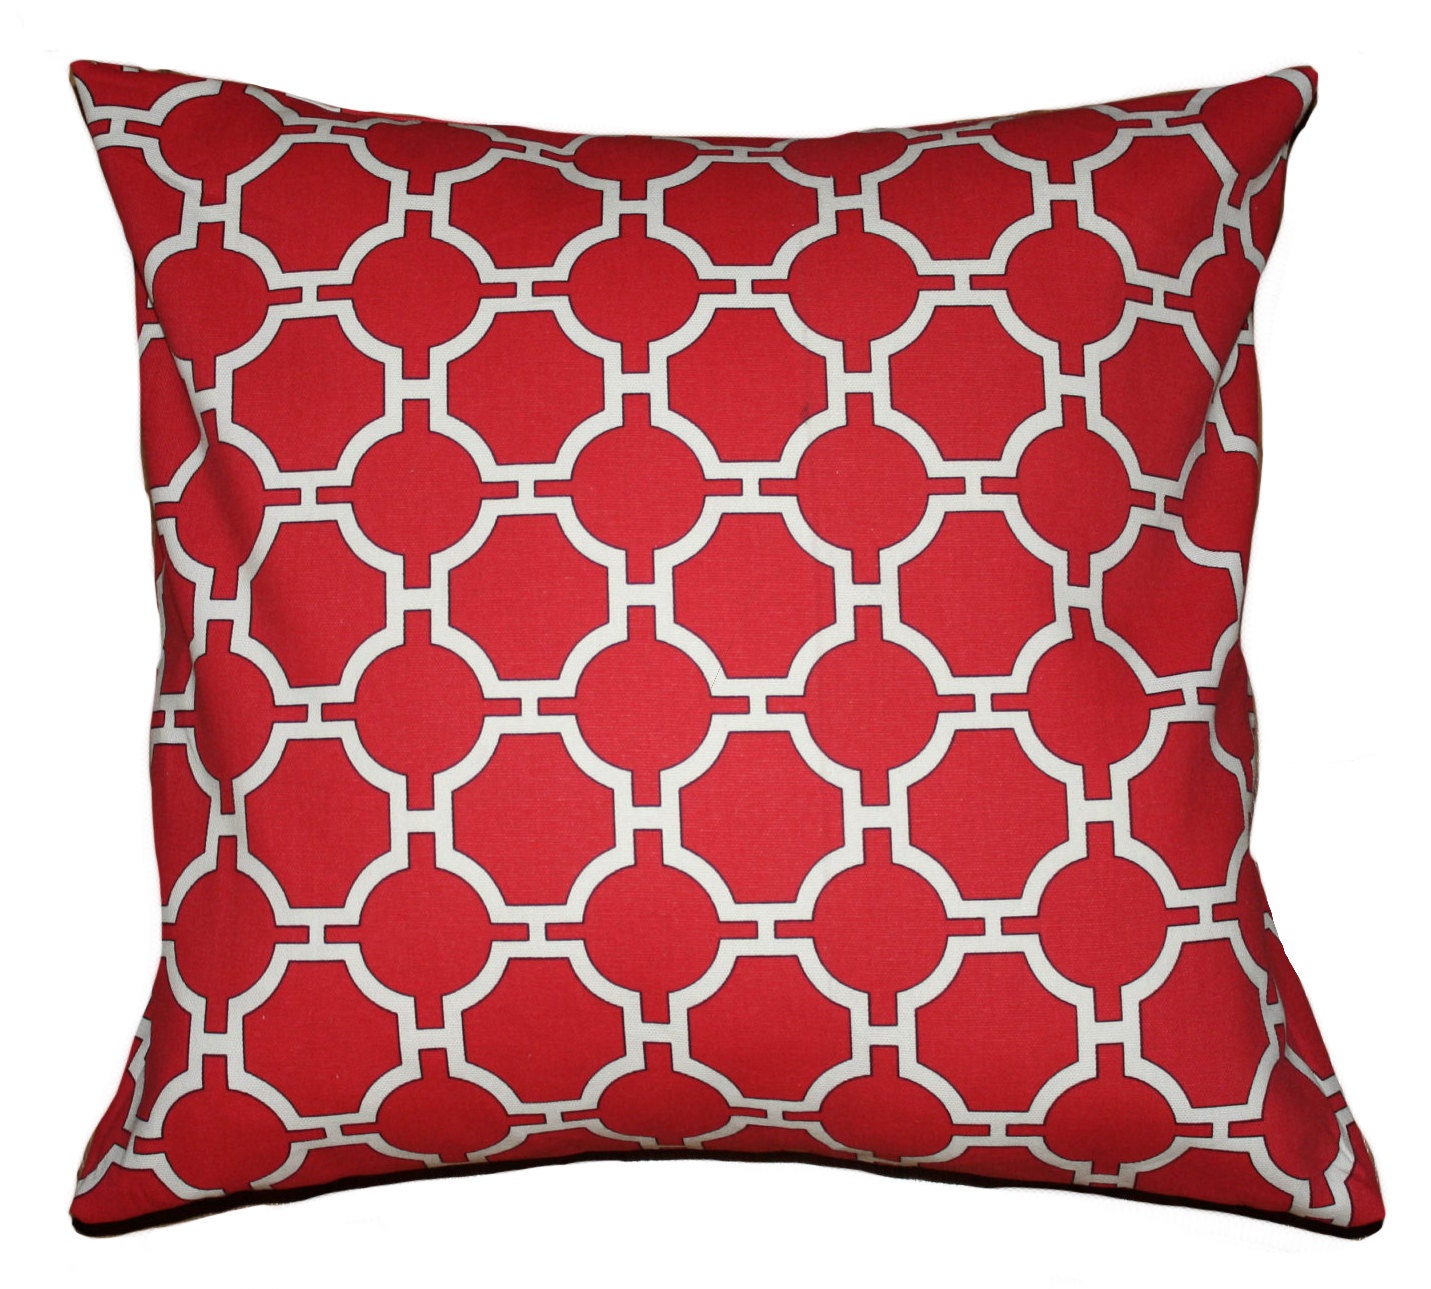 Red Pillow Cover Geometric Pattern   20" x 20" - Crackerbox